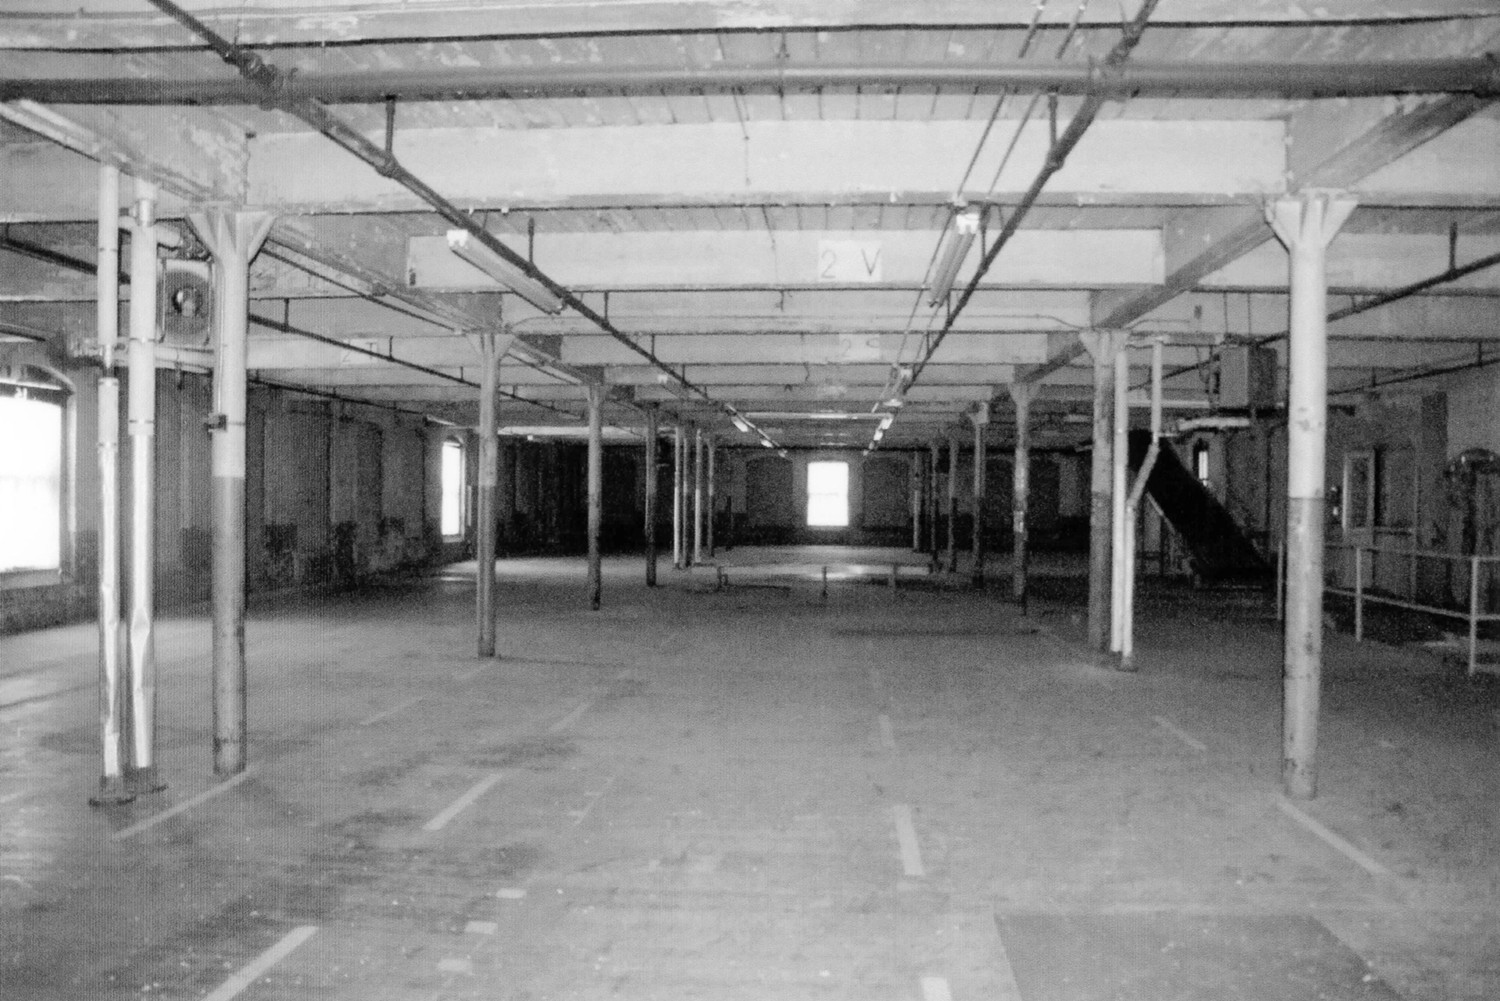 American Cigar Company, Trenton New Jersey 2nd floor, view west (2010)